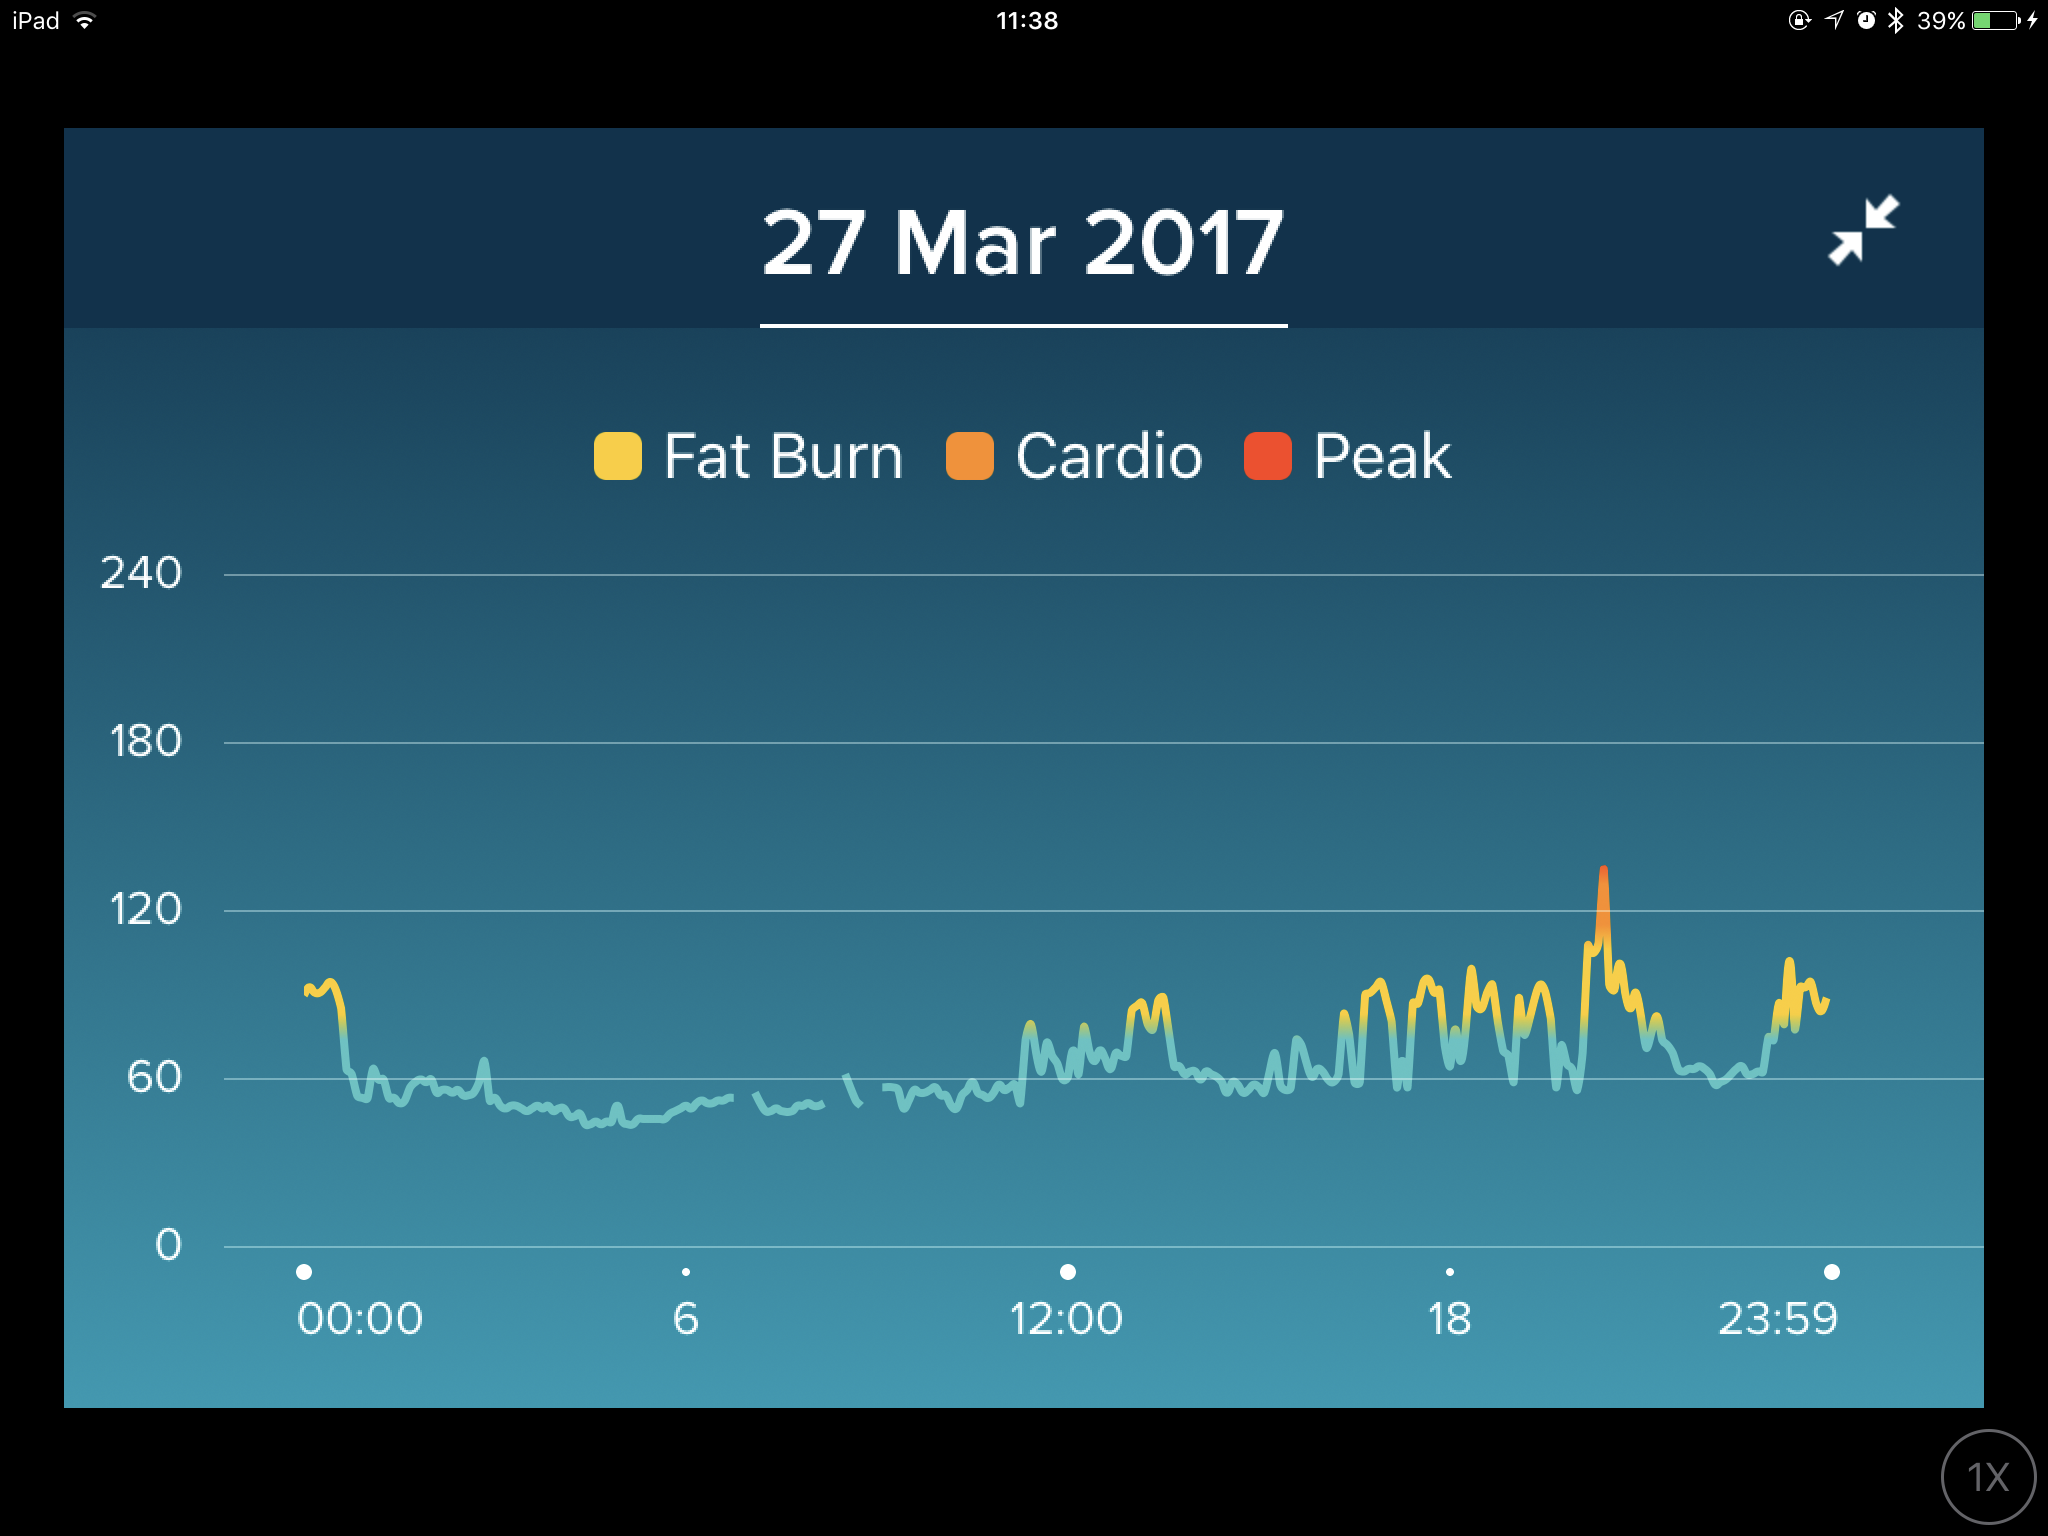 fitbit heart attack monitor